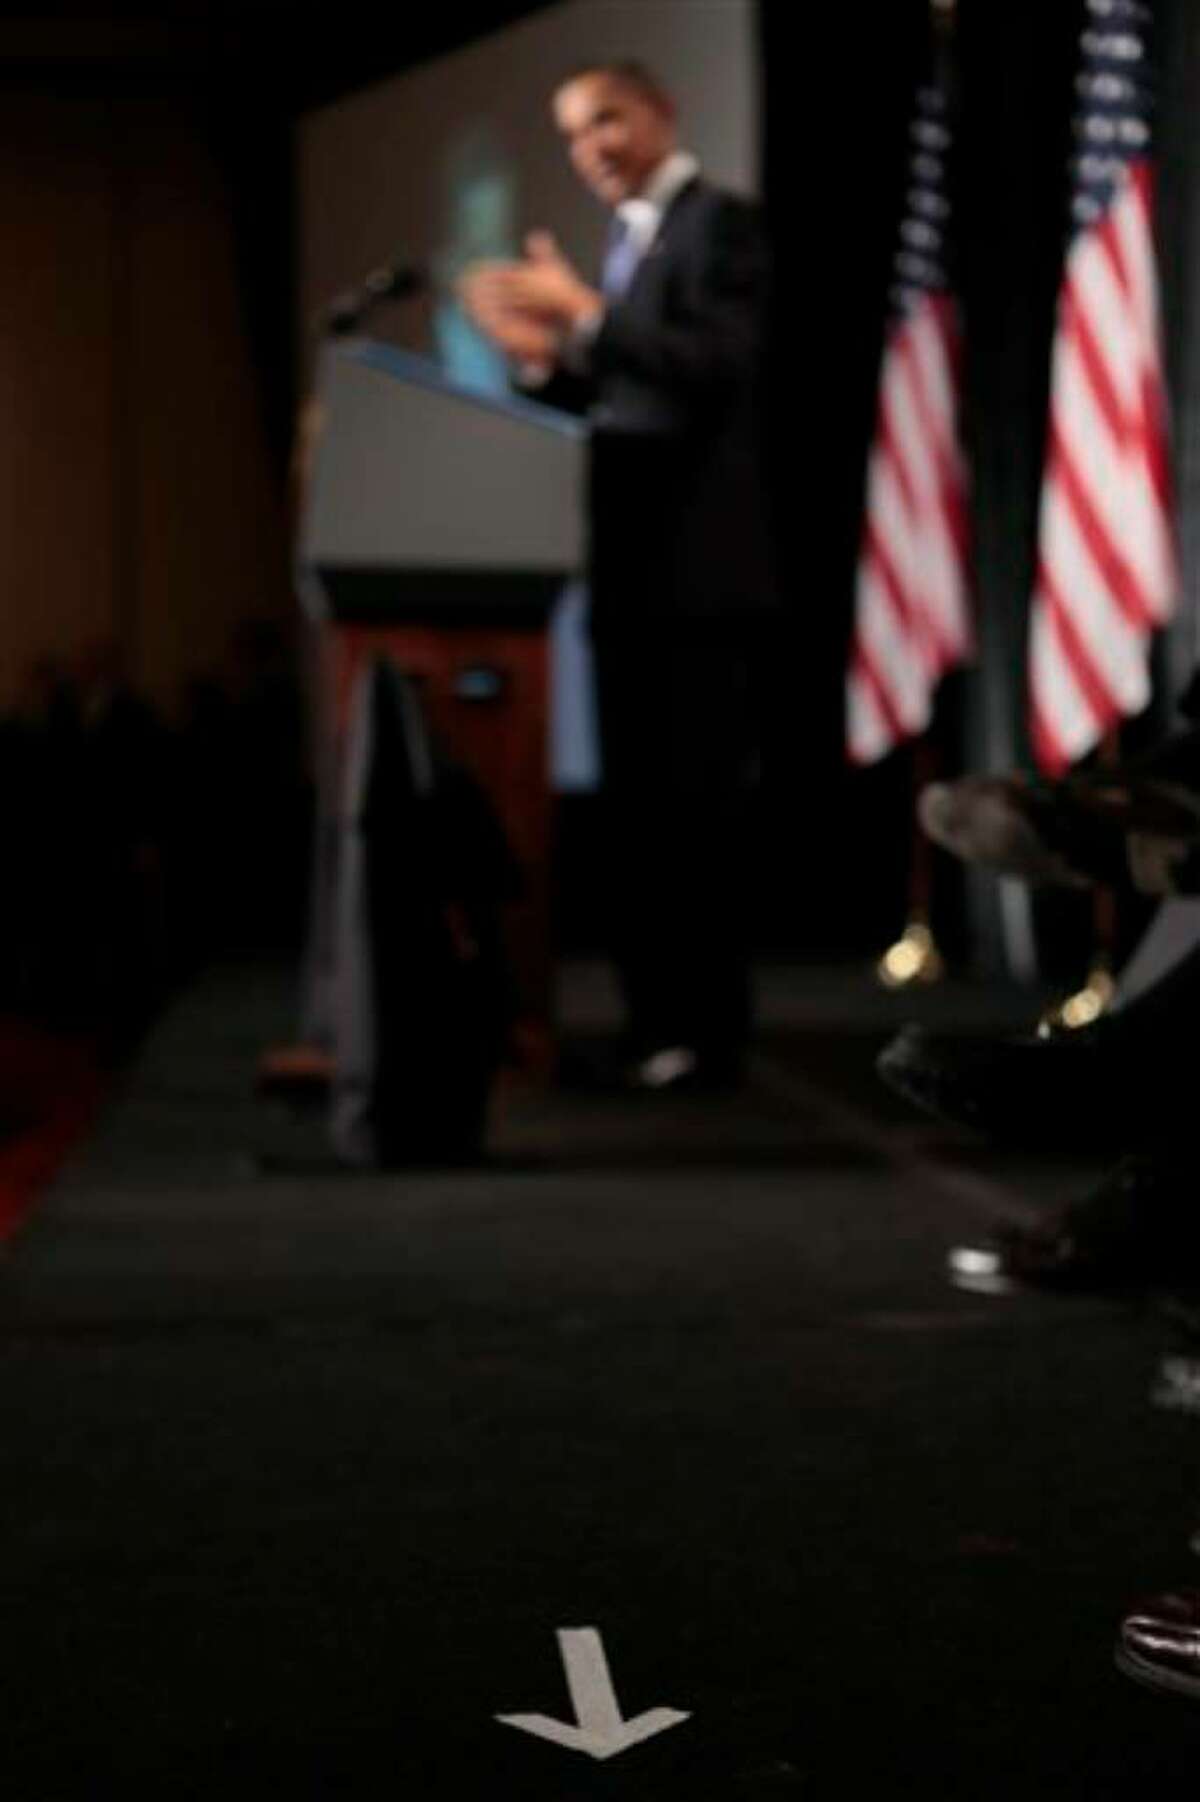 A stage marker is seen as President Barack Obama speaks to Republican lawmakers at the GOP House Issues Conference in Baltimore., Friday, Jan. 29, 2010. (AP Photo/Charles Dharapak)